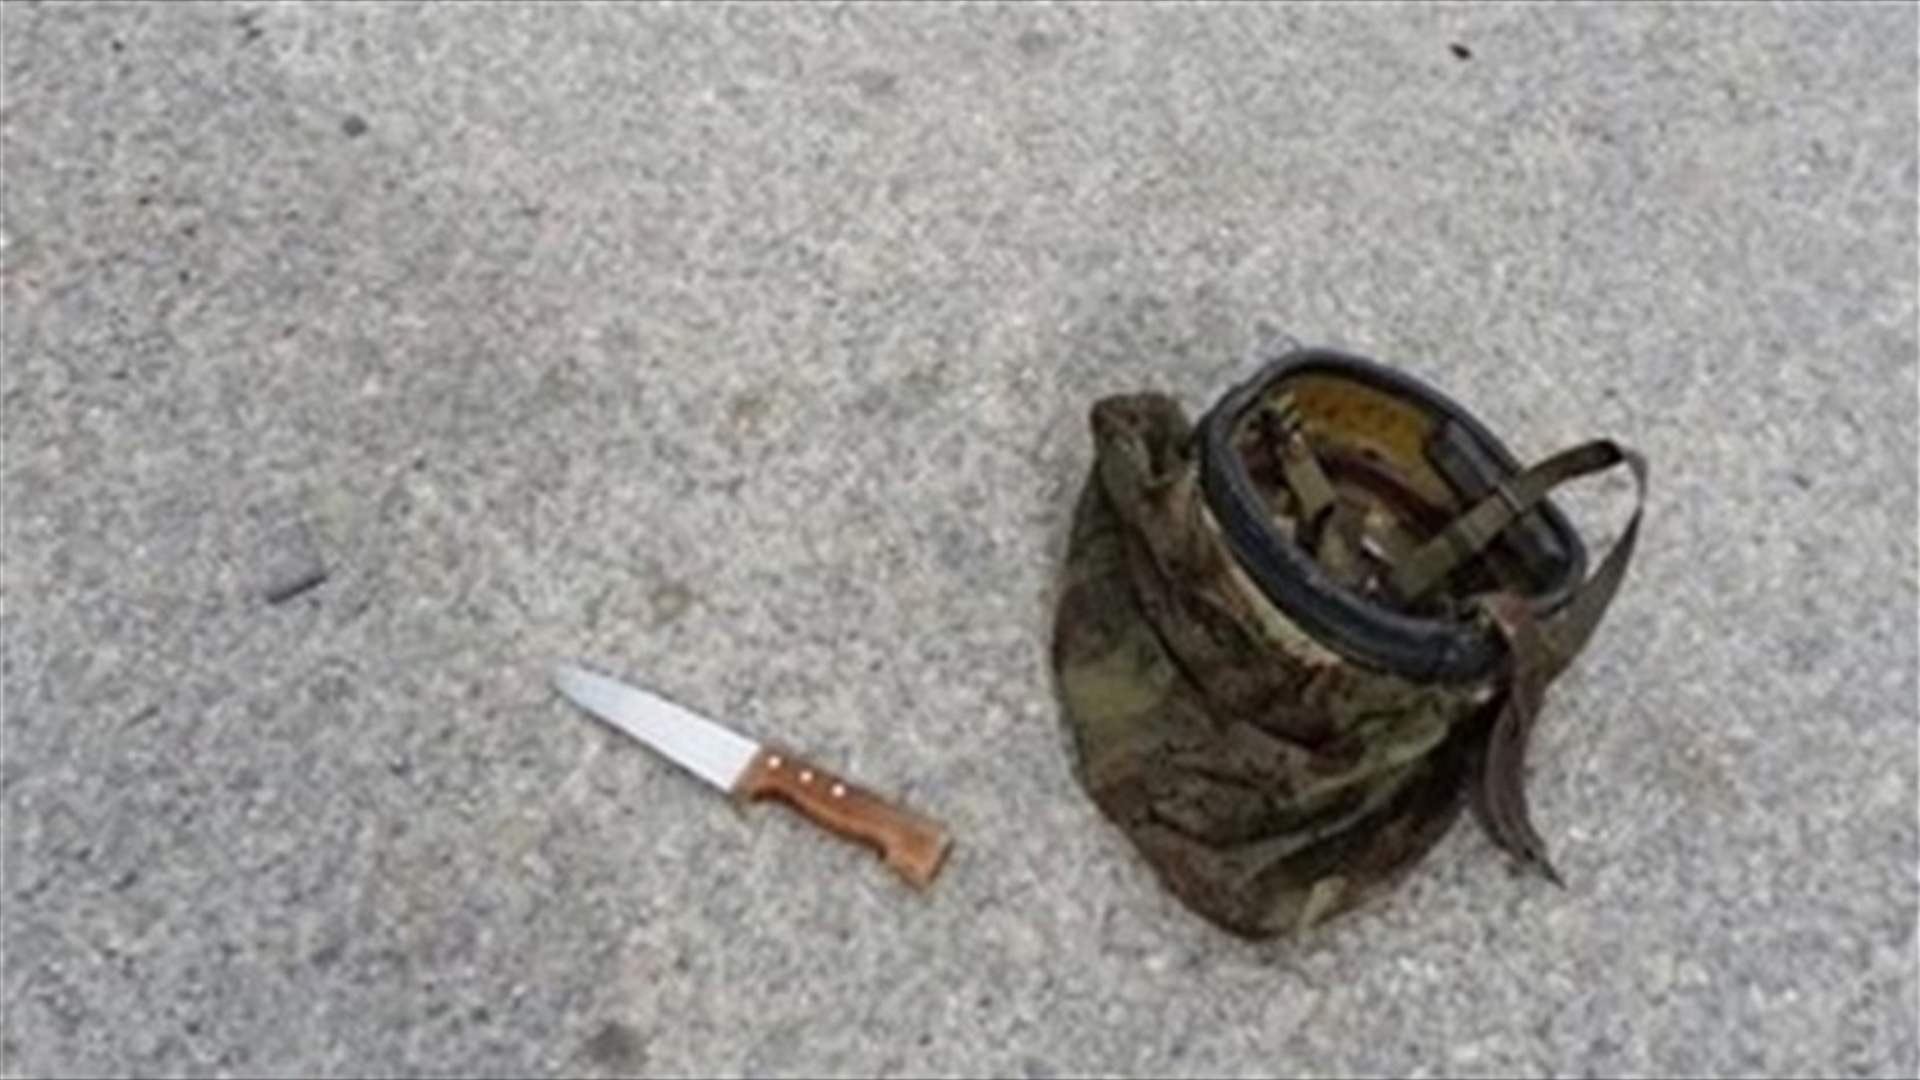 Two Palestinians who stabbed Israeli soldier shot dead in W. Bank -army